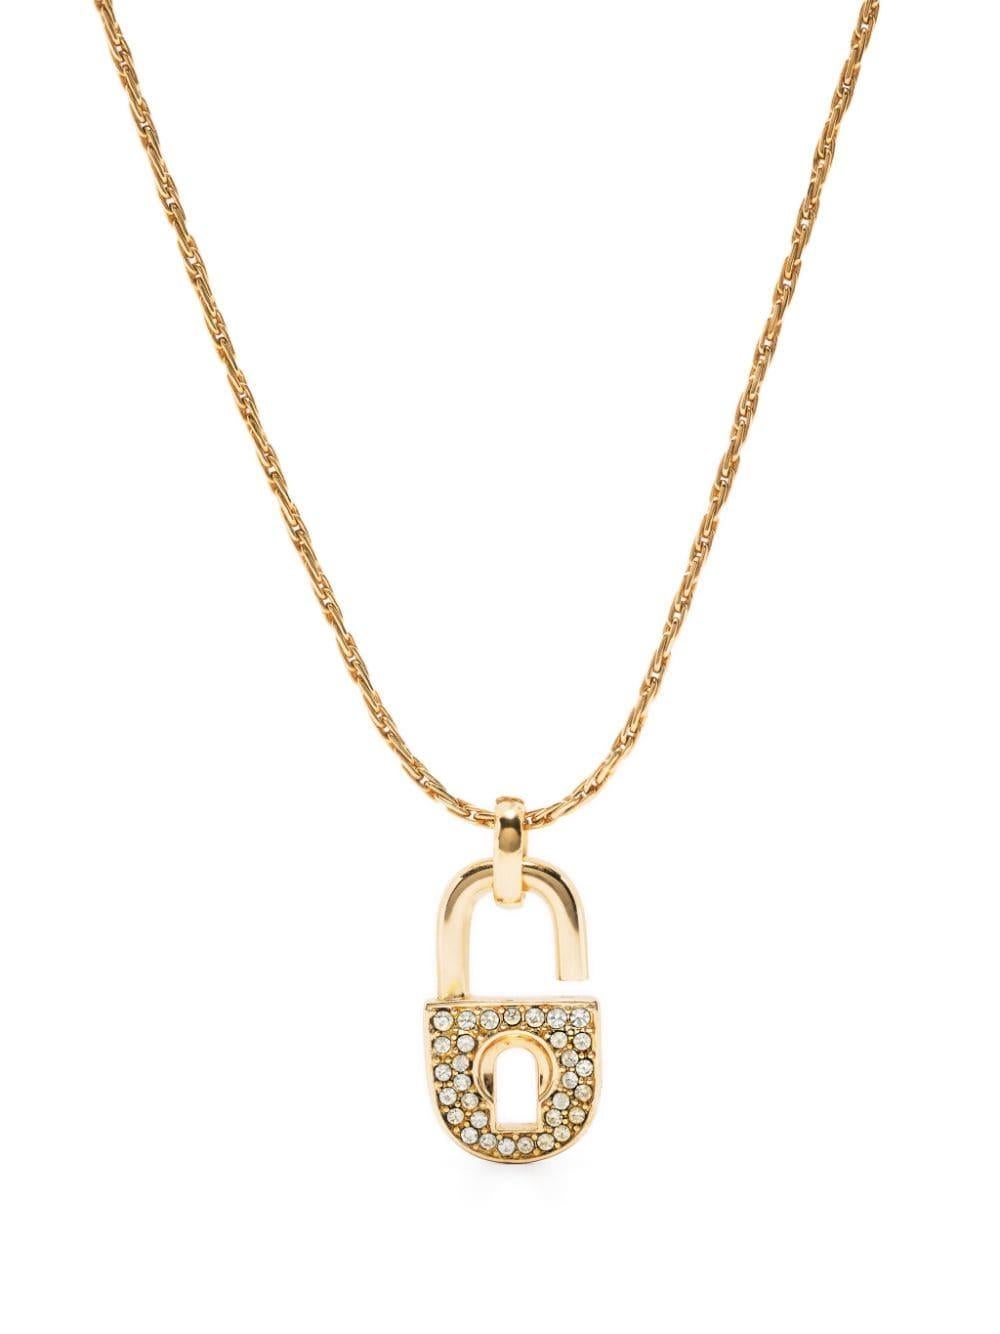 Christian Dior Gold-tone padlock pendant necklace featuring a front gold-tone and strass padlock medal, a logo fastening, an adjustable fit, spring-ring fastening.
Length: 16.9in (43cm)
Circa: 1990s
In good vintage condition. Made in France.
We